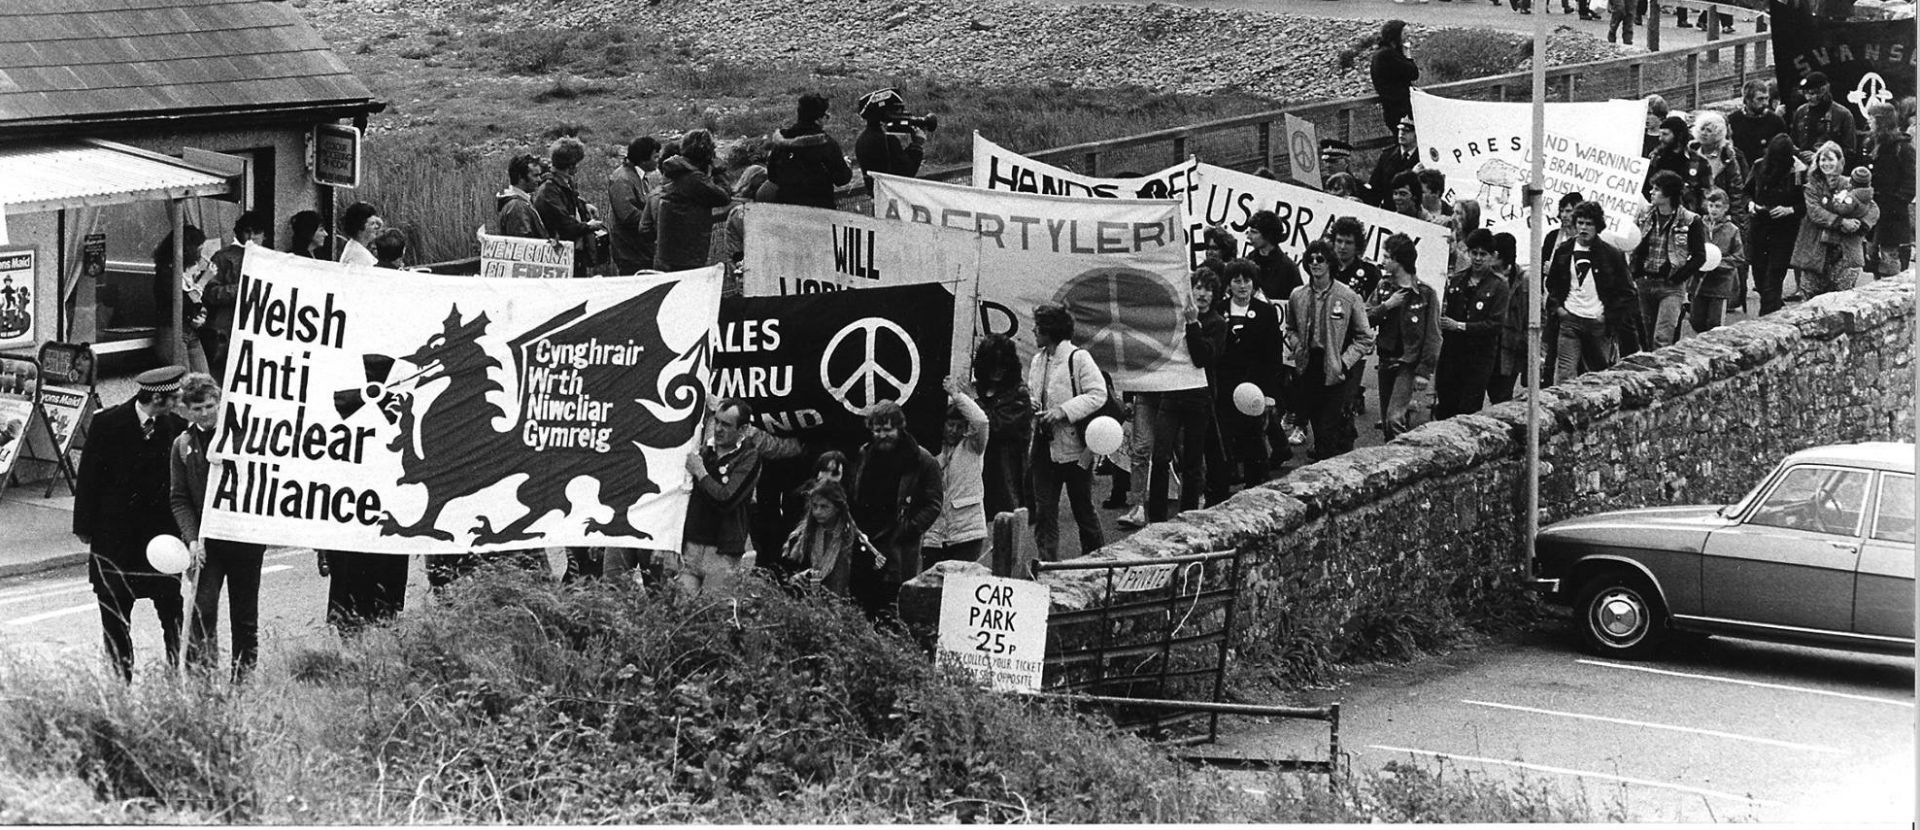 A anti nuclear march in Wales. Lots of people with banners.